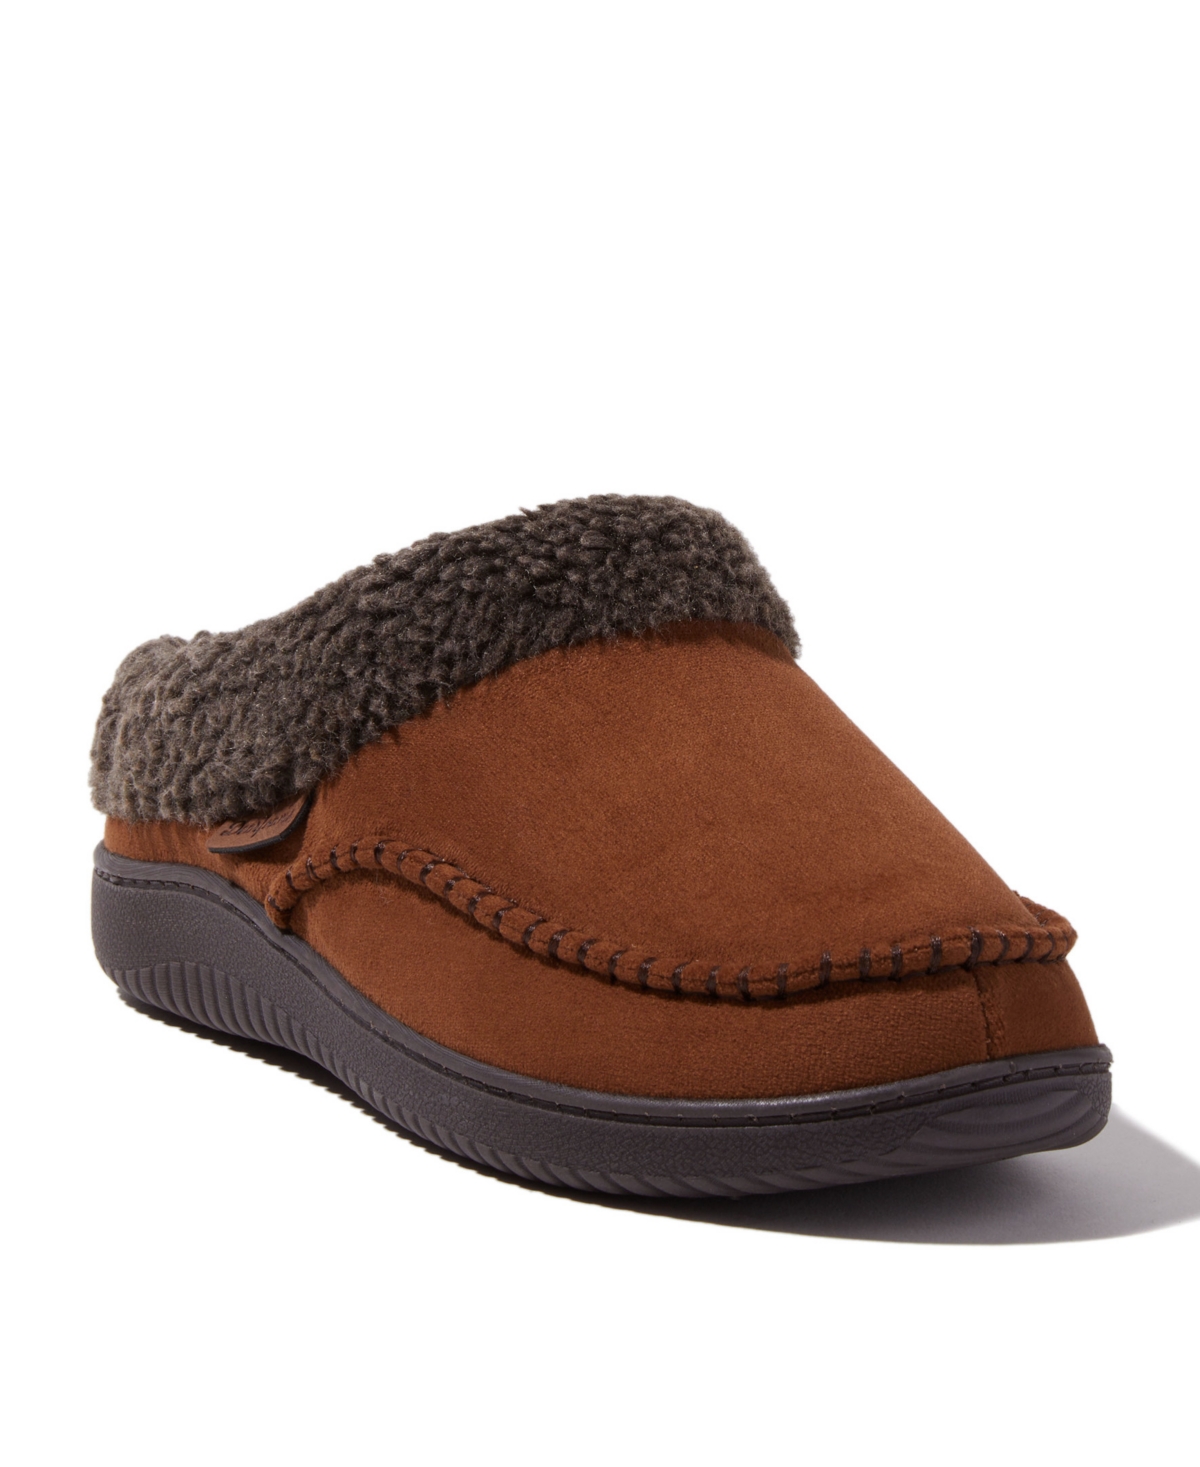 DEARFOAMS MEN'S MARSHALL FAUX-SUEDE LINED CLOG SLIPPERS